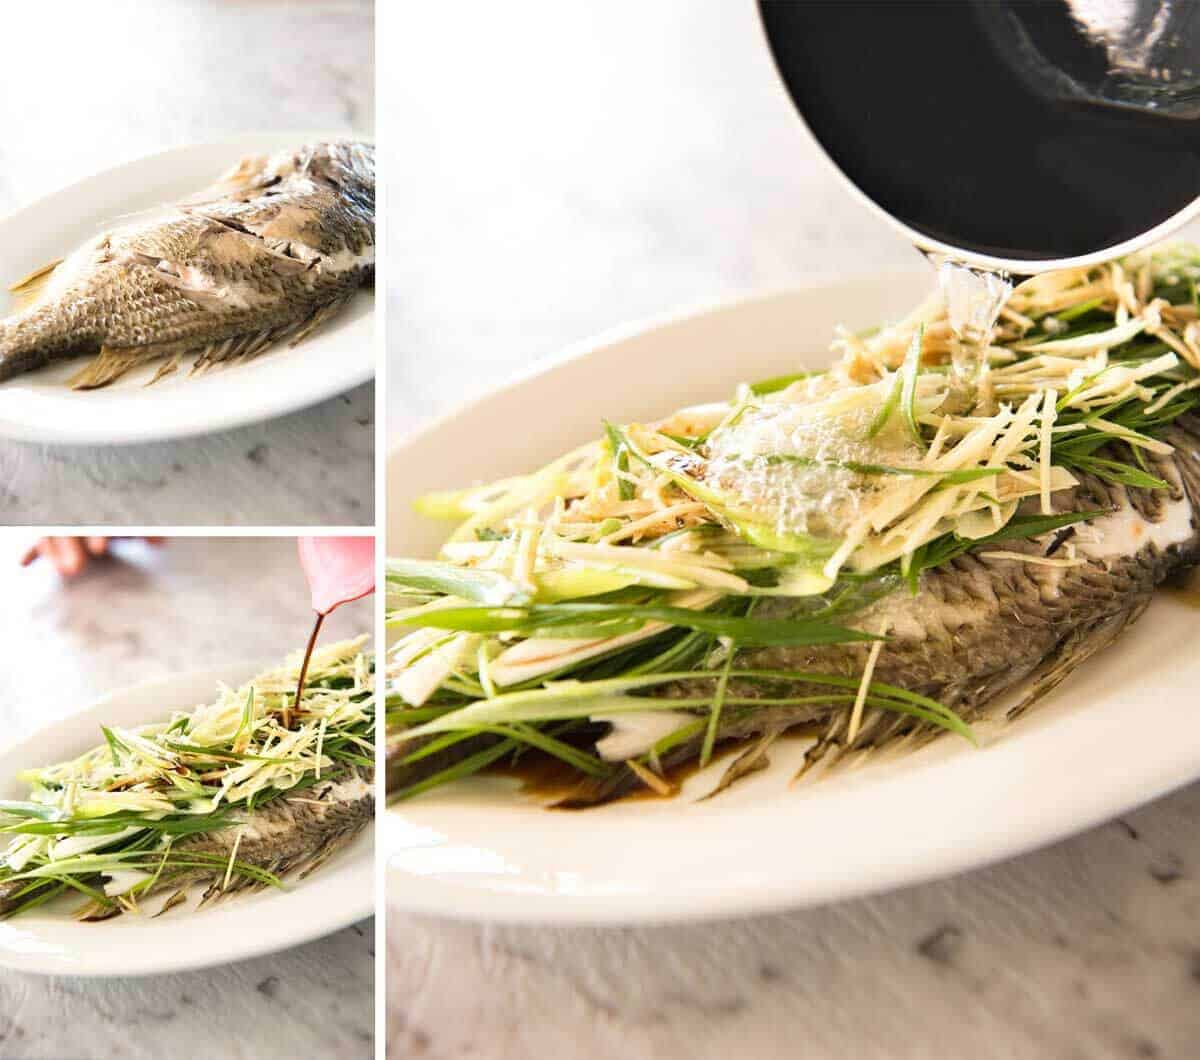 A Chinese Steamed Fish topped with Ginger and Shallots and seasonings, with hot oil poured over it to create a dramatic sizzle and an amazing sauce. So simple, yet so utterly delicious. Steam OR bake the fish! www.recipetineats.com